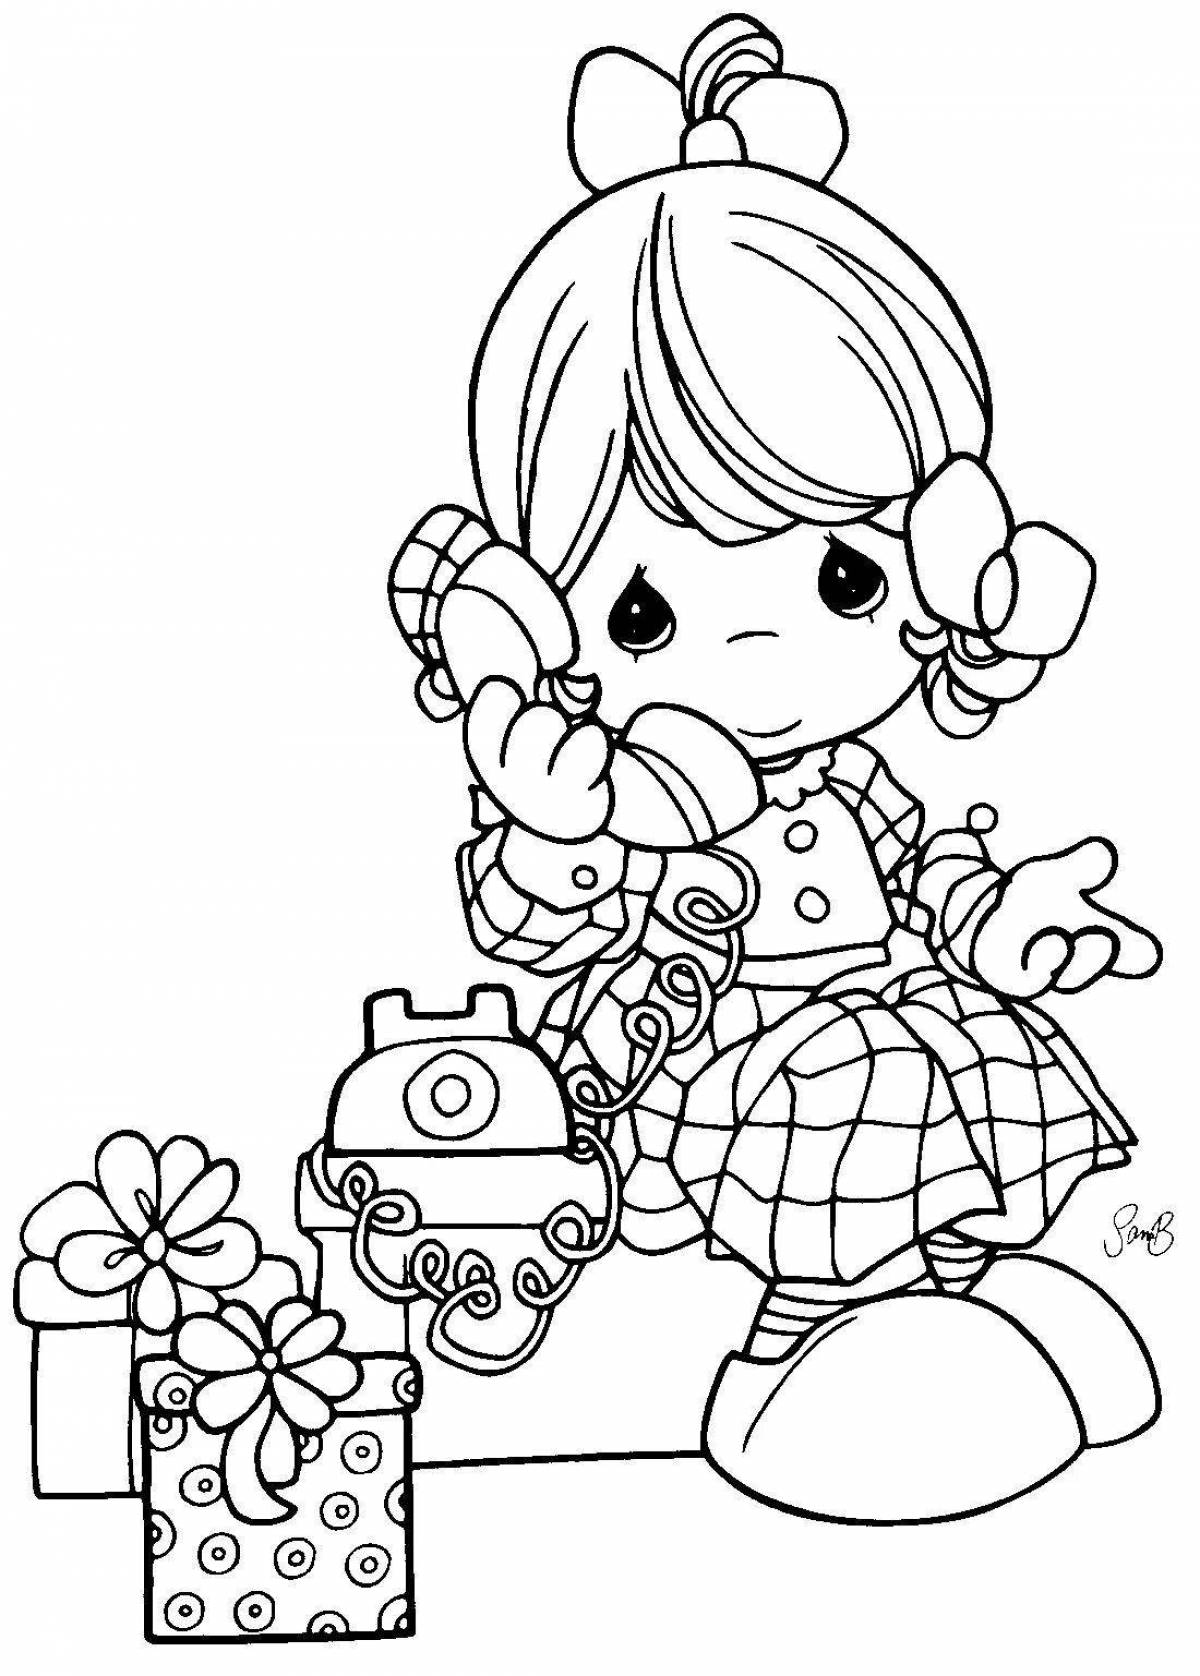 Awesome phone coloring pages for girls